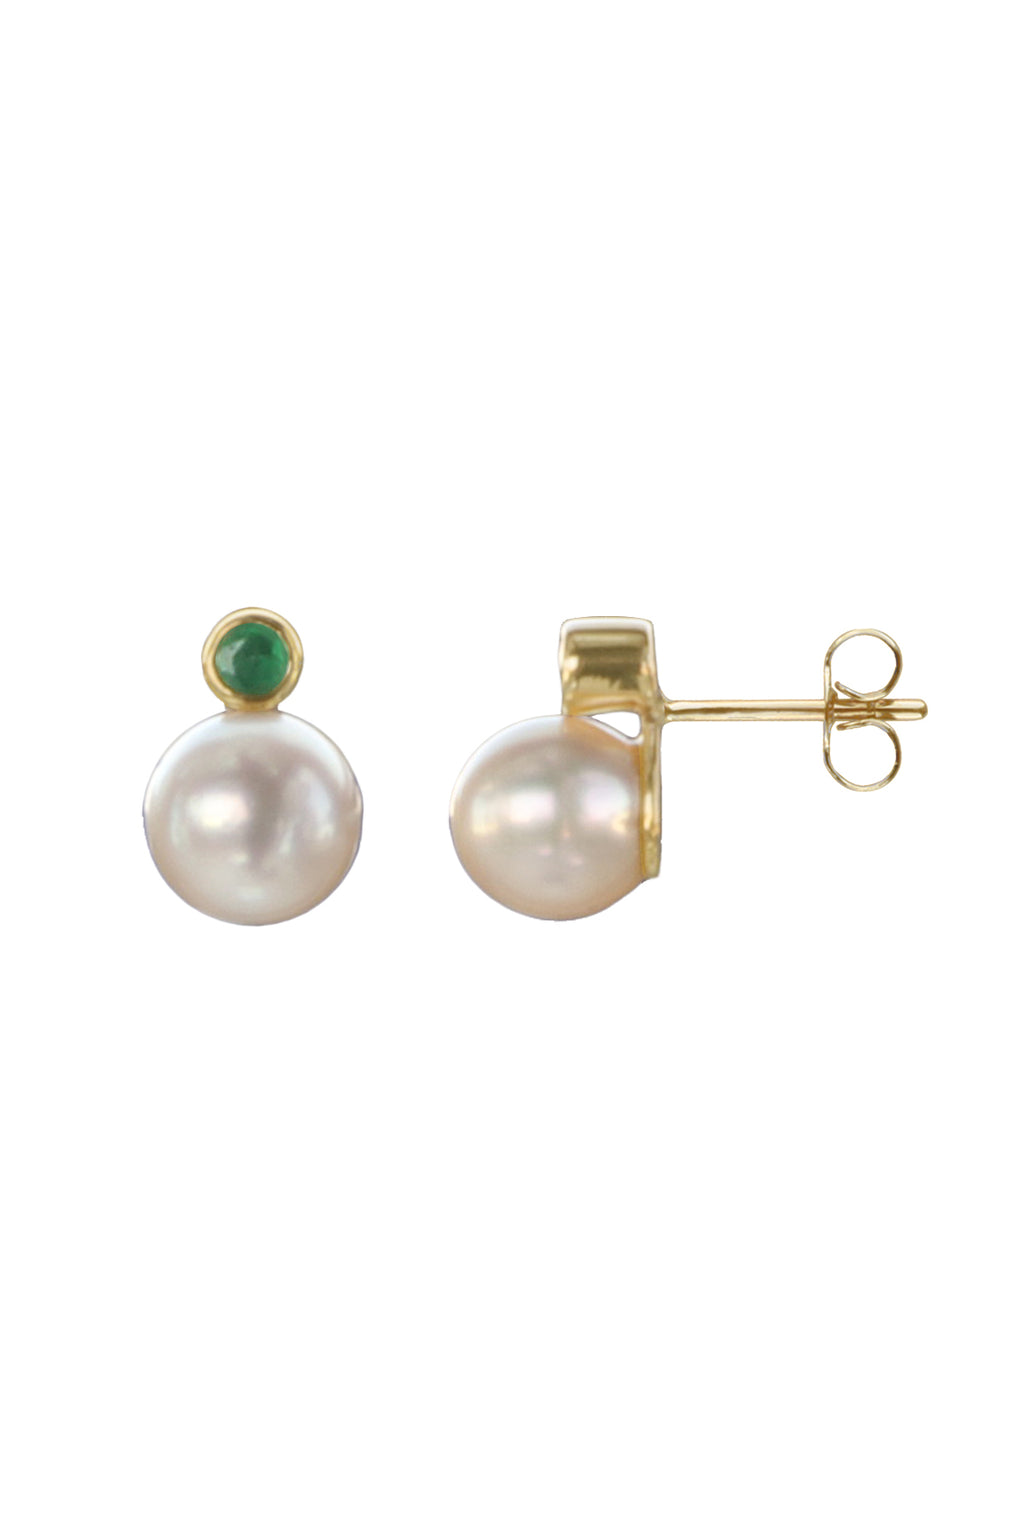 Gold Earrings set with Emeralds and Pearls